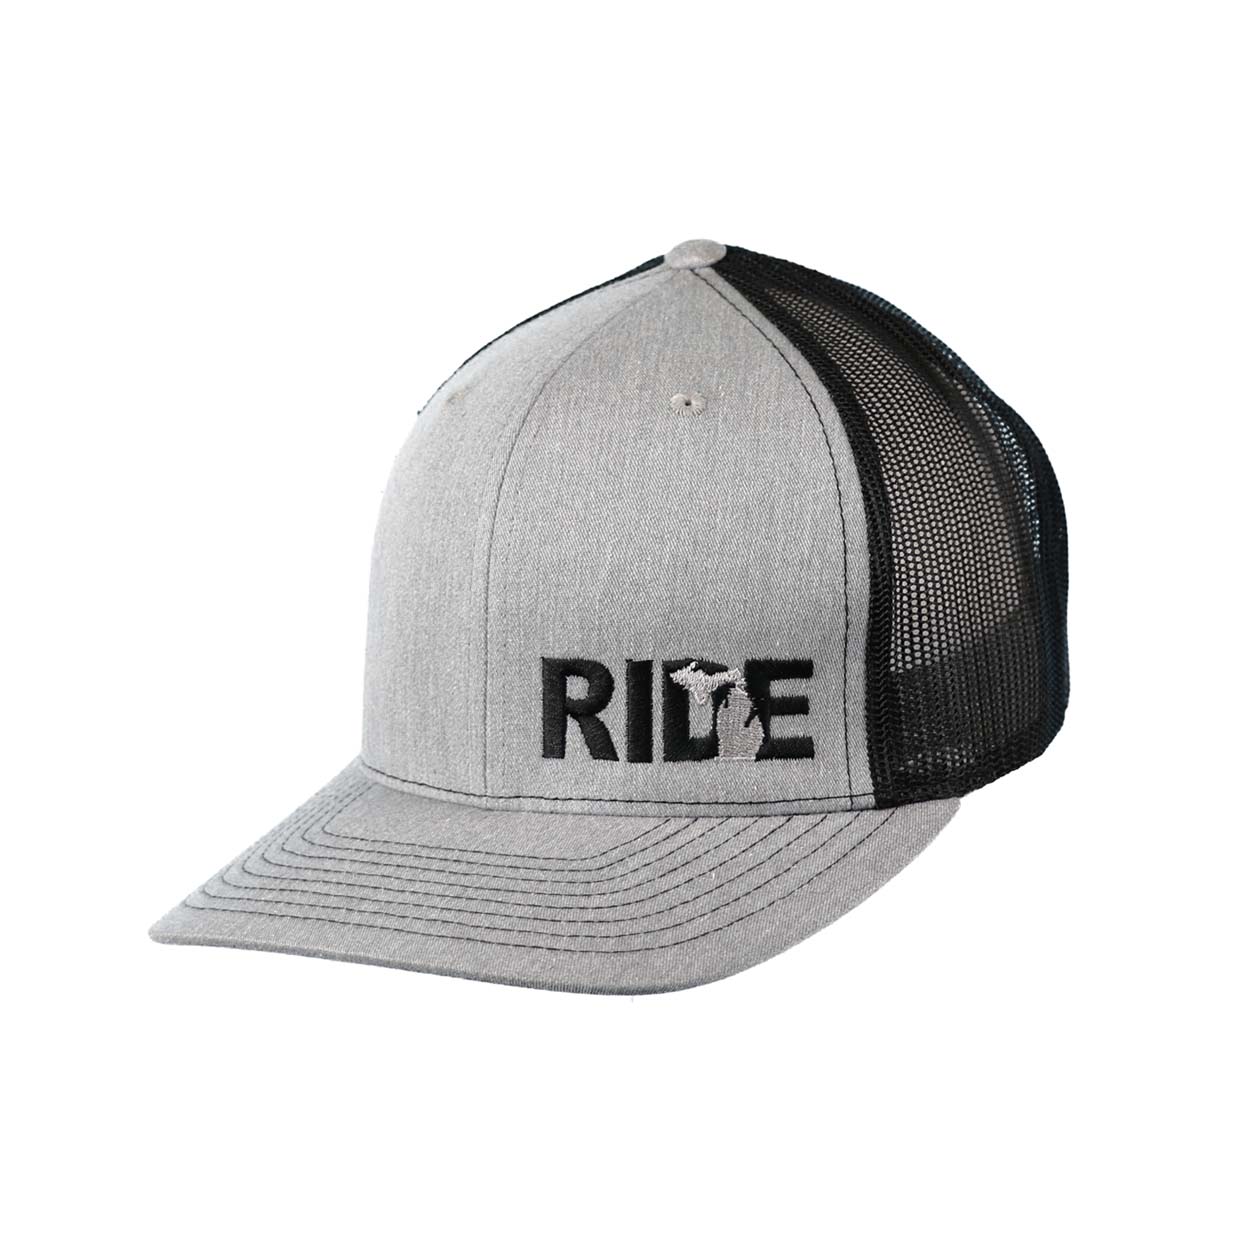 Ride Michigan Classic Pro Night Out Embroidered Snapback Trucker Hat Heather Gray/Black